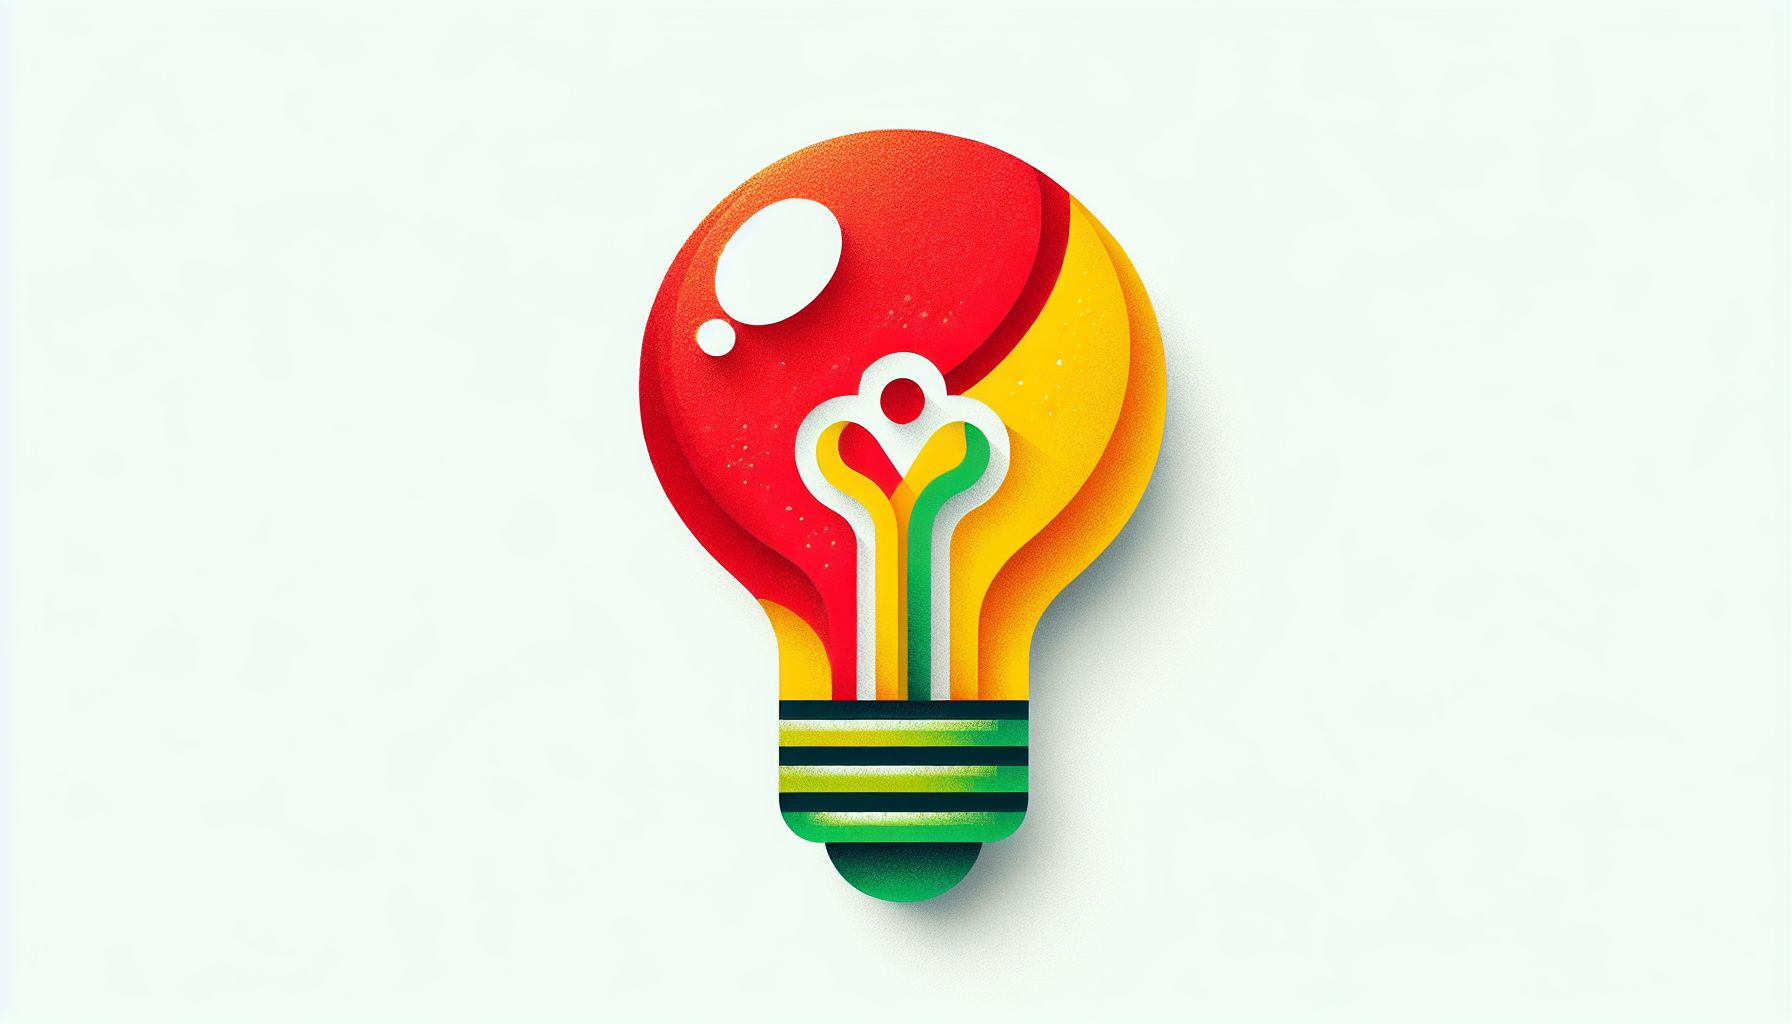 Lightbulb in flat illustration style and white background, red #f47574, green #88c7a8, yellow #fcc44b, and blue #645bc8 colors.